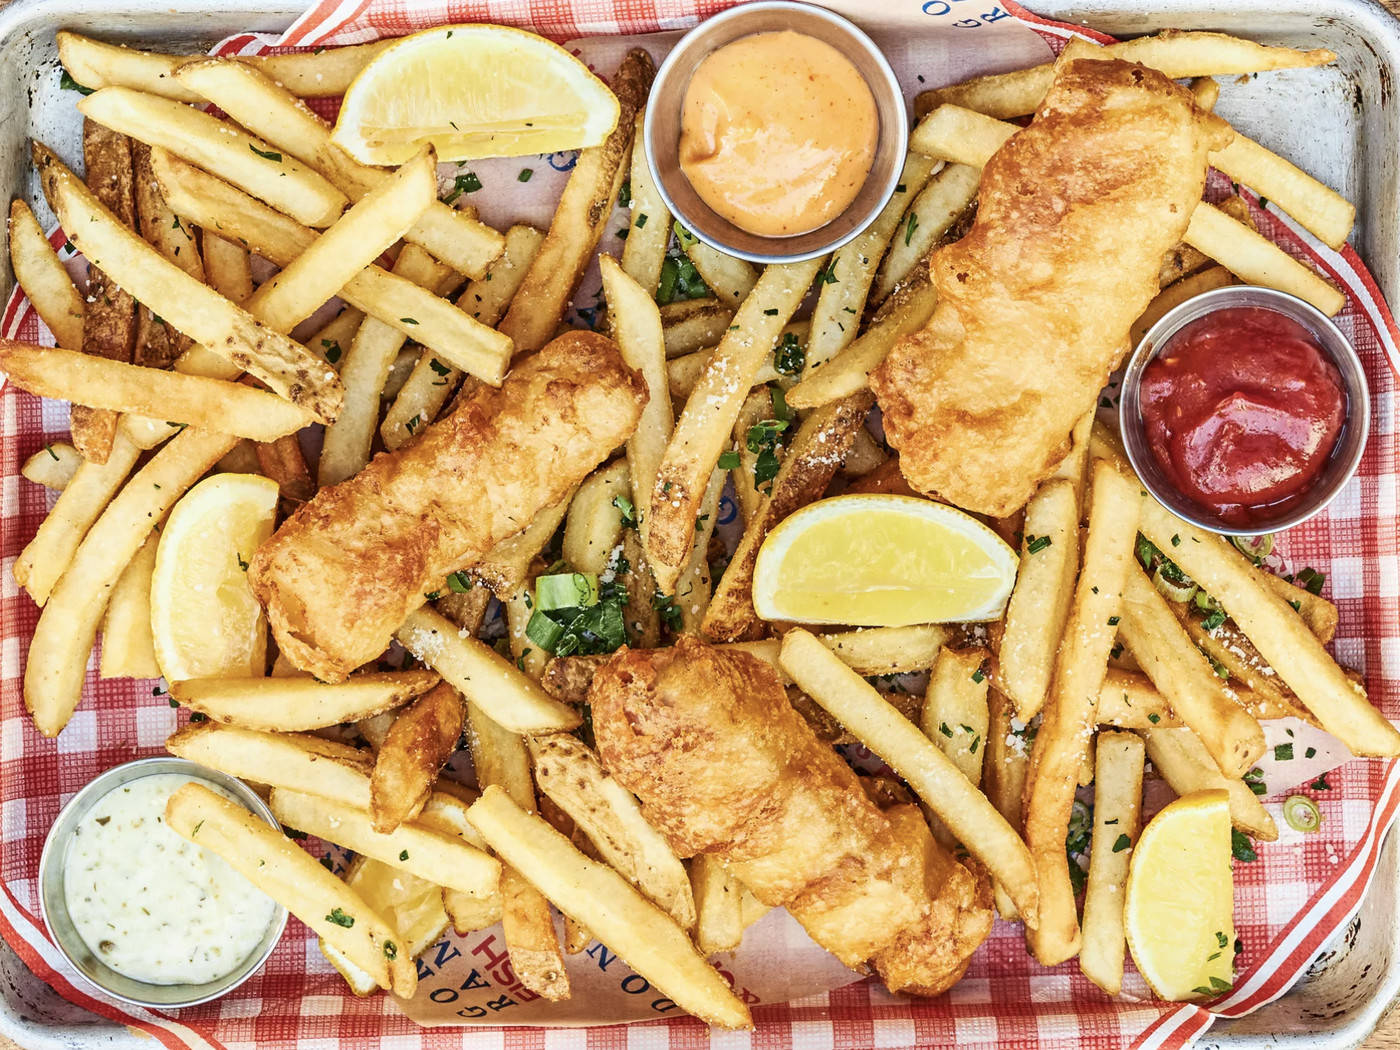 Authentic British Cuisine: A Tray Full of Delicious Fish and Chips Wallpaper